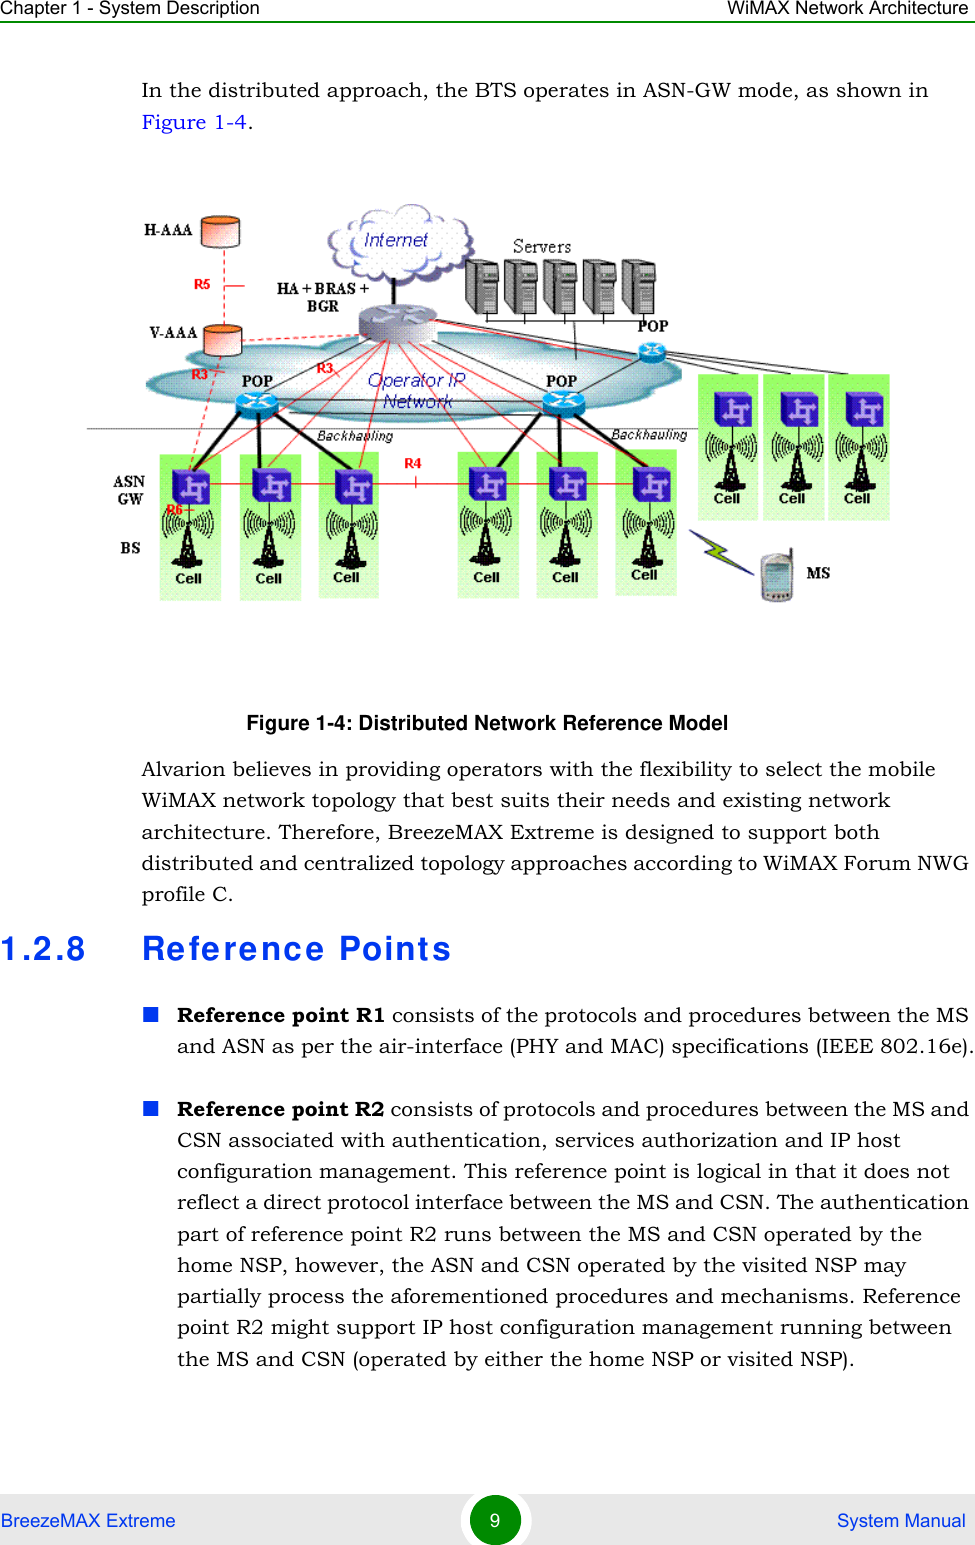 Chapter 1 - System Description WiMAX Network ArchitectureBreezeMAX Extreme 9 System ManualIn the distributed approach, the BTS operates in ASN-GW mode, as shown in Figure 1-4. Alvarion believes in providing operators with the flexibility to select the mobile WiMAX network topology that best suits their needs and existing network architecture. Therefore, BreezeMAX Extreme is designed to support both distributed and centralized topology approaches according to WiMAX Forum NWG profile C.1.2.8 Re ferenc e Point sReference point R1 consists of the protocols and procedures between the MS and ASN as per the air-interface (PHY and MAC) specifications (IEEE 802.16e).Reference point R2 consists of protocols and procedures between the MS and CSN associated with authentication, services authorization and IP host configuration management. This reference point is logical in that it does not reflect a direct protocol interface between the MS and CSN. The authentication part of reference point R2 runs between the MS and CSN operated by the home NSP, however, the ASN and CSN operated by the visited NSP may partially process the aforementioned procedures and mechanisms. Reference point R2 might support IP host configuration management running between the MS and CSN (operated by either the home NSP or visited NSP).Figure 1-4: Distributed Network Reference Model